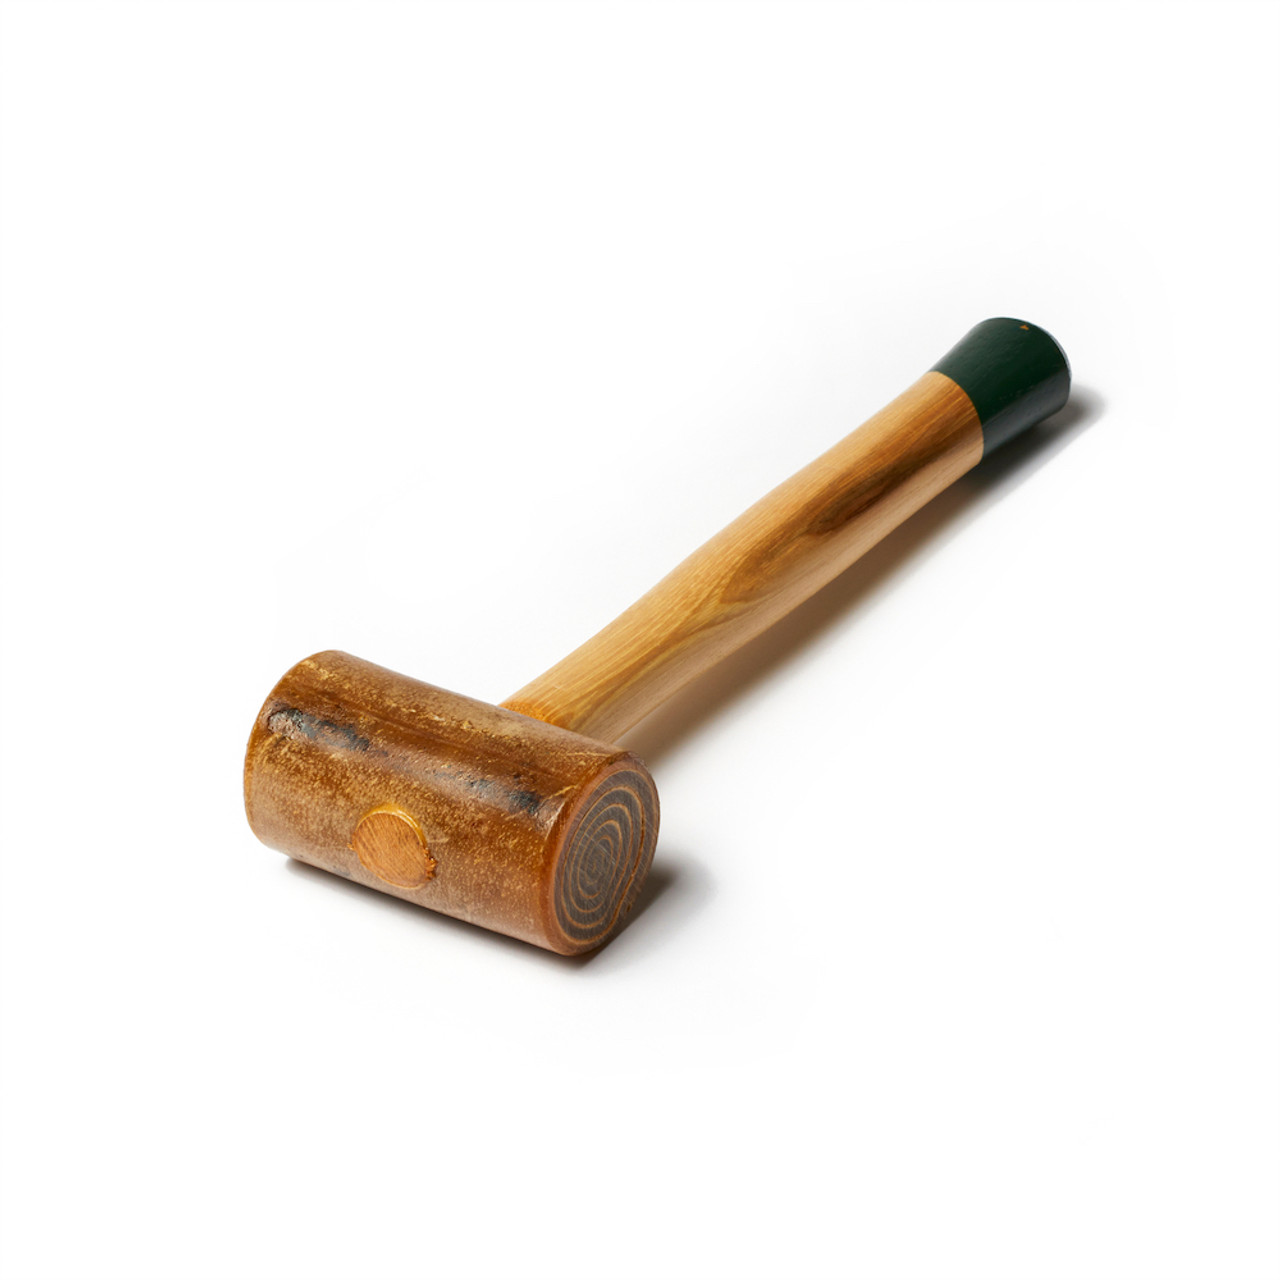 Garland Weighted Rawhide Mallet, 1-1/2 Face dia., 12 oz. - 60-085-8 -  Light Tool Supply